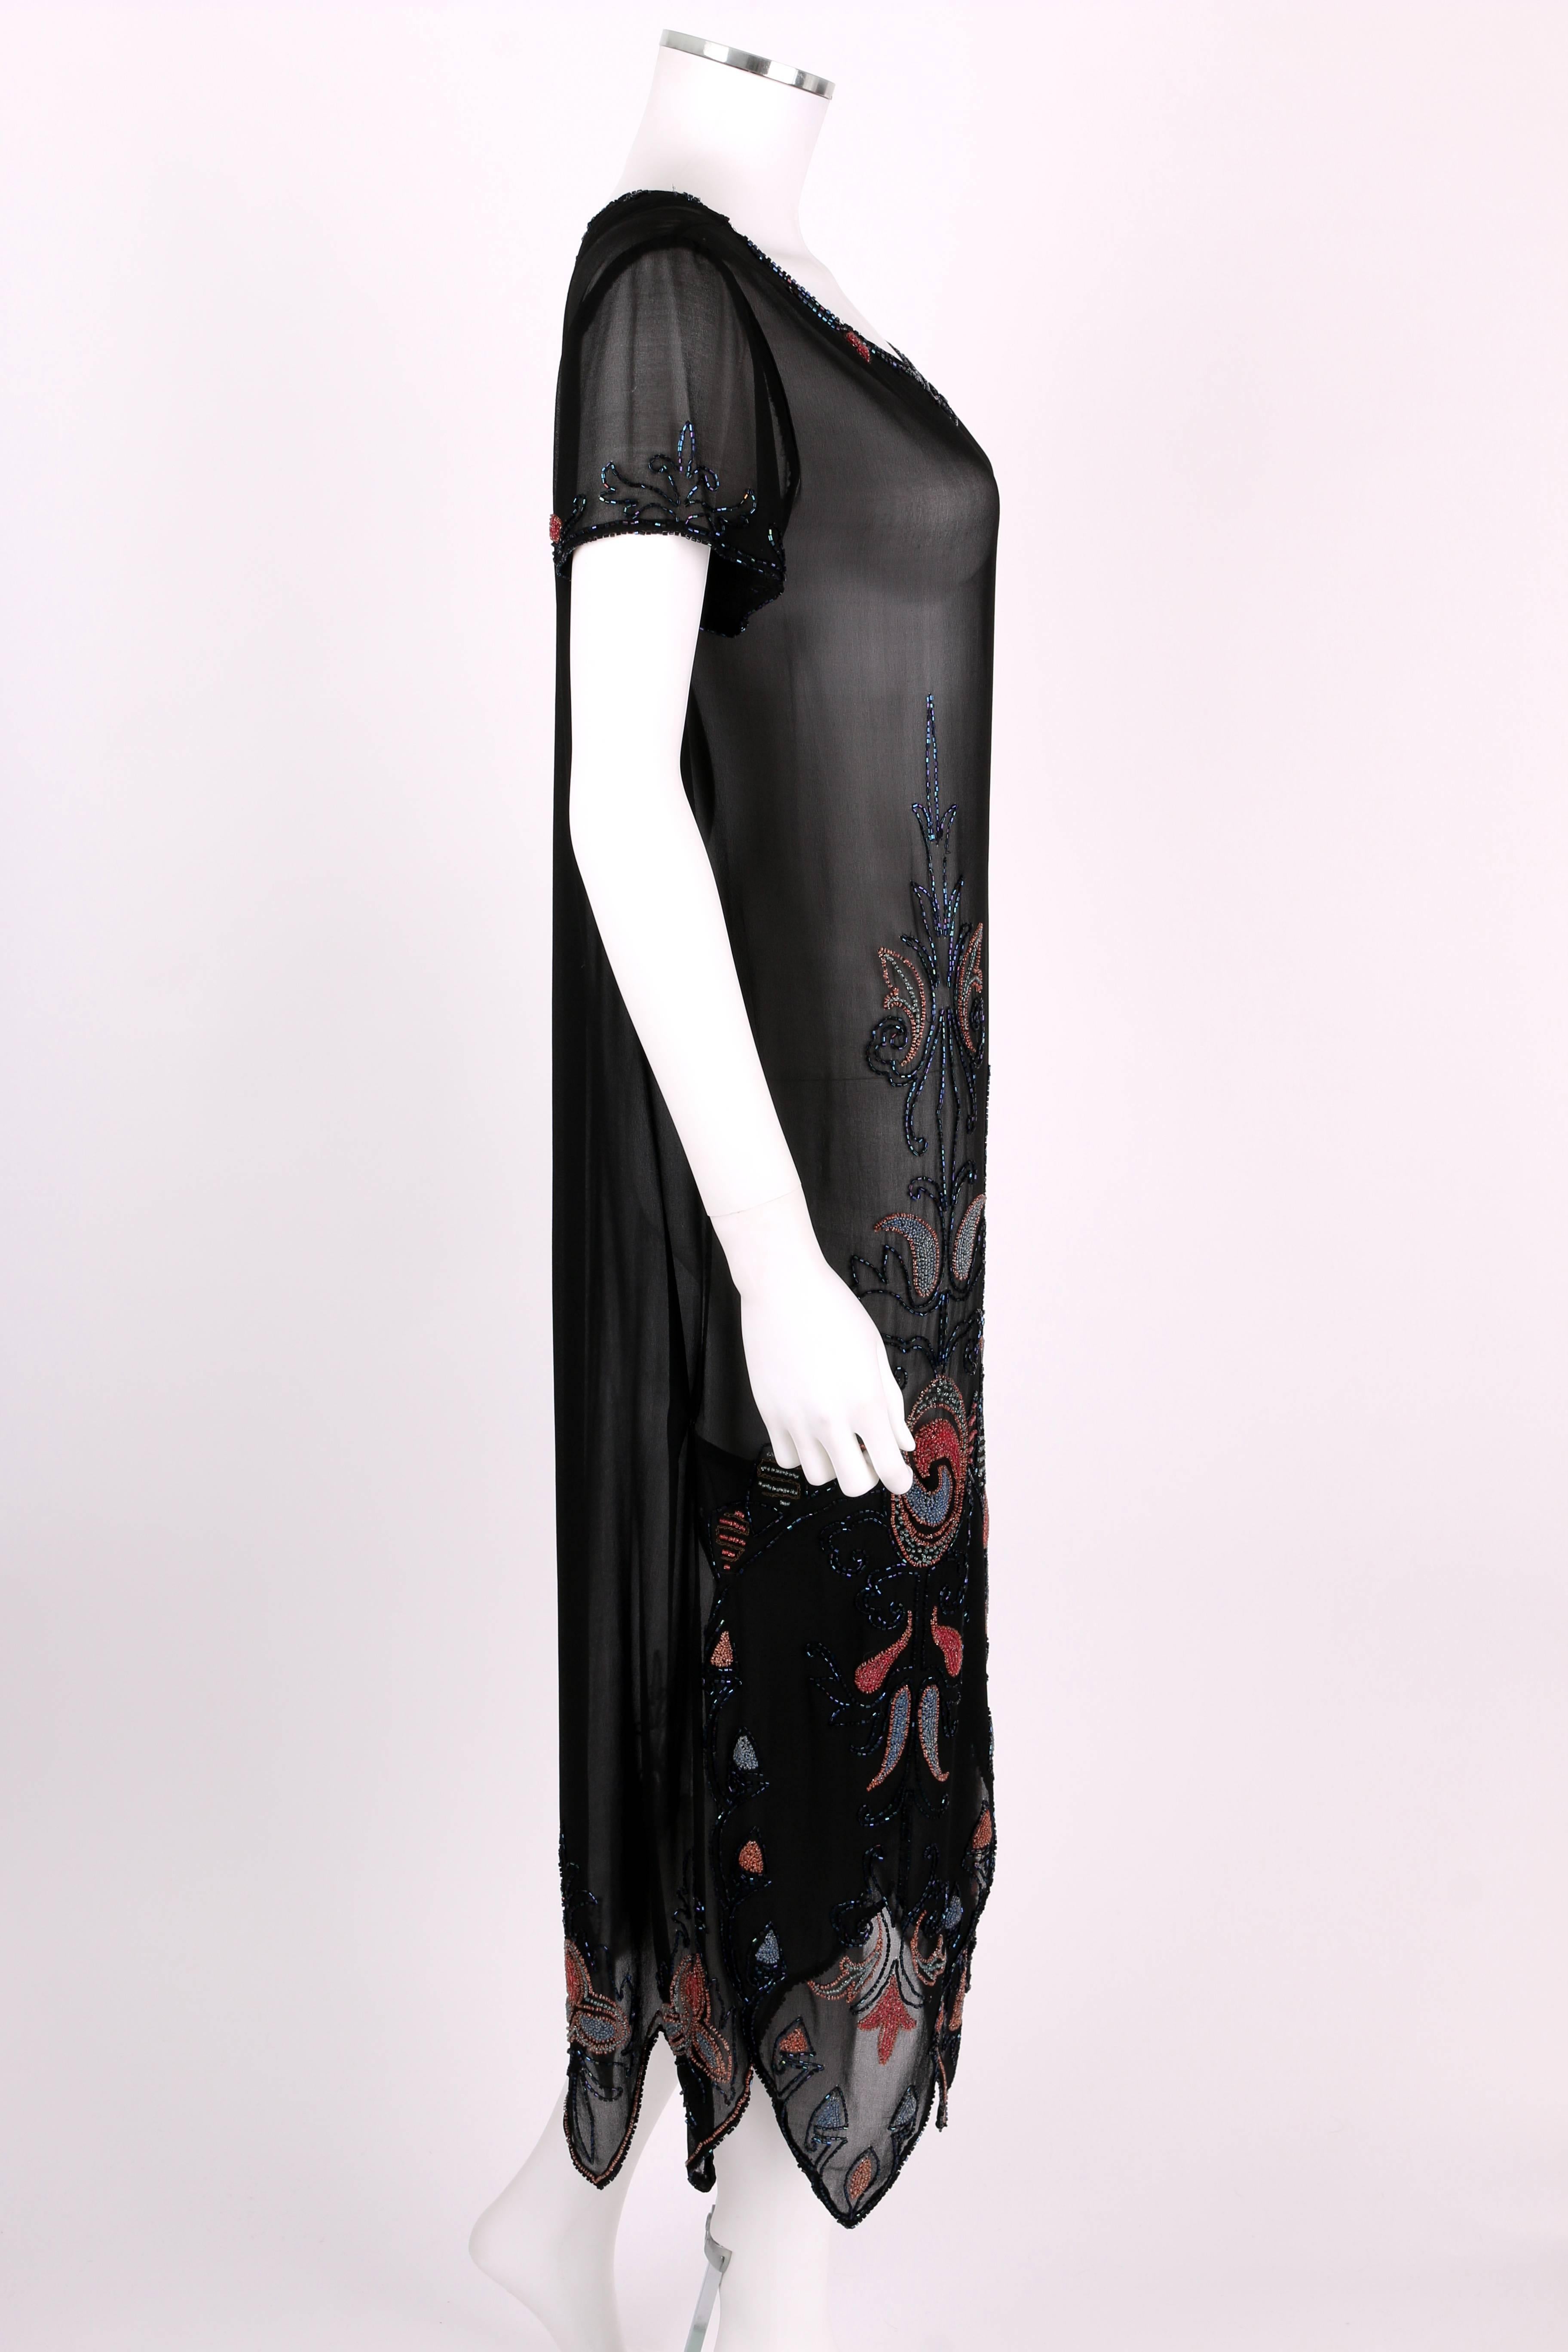 COUTURE c.1920's Black Silk Georgette Floral Glass Beaded Flapper Evening Dress In Good Condition For Sale In Thiensville, WI